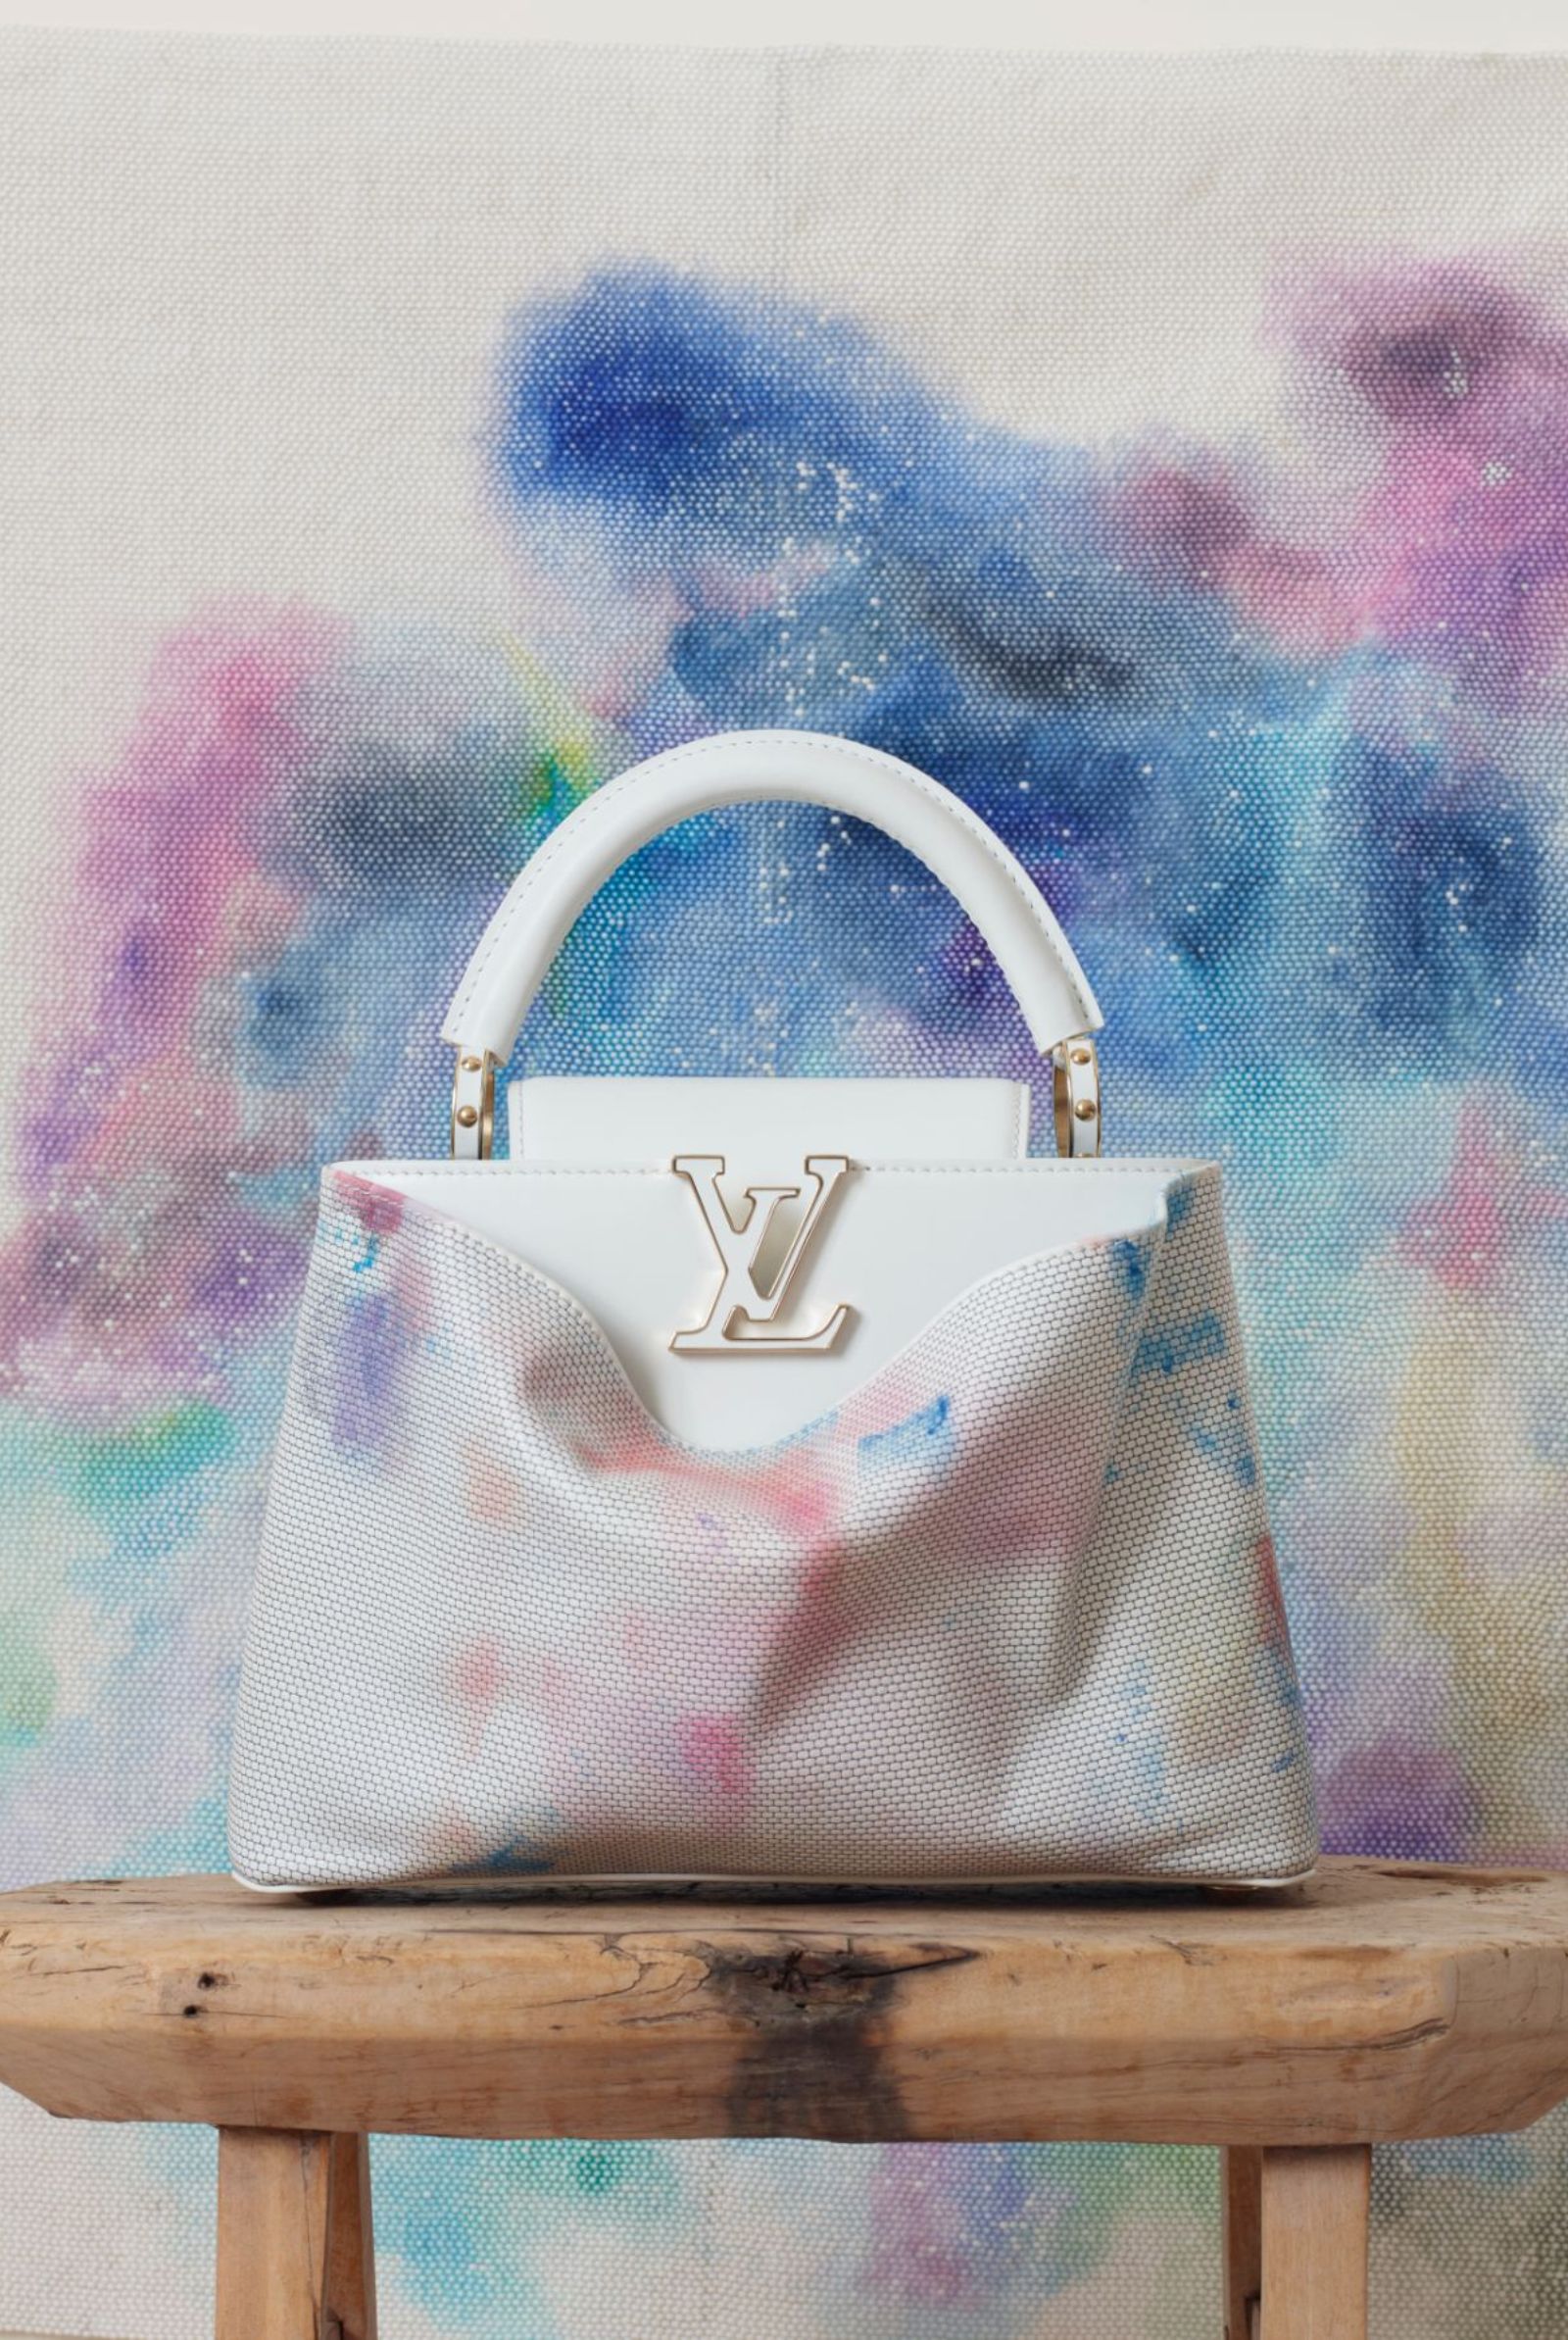 Louis Vuitton - Artycapucines Collection - New Art Editions